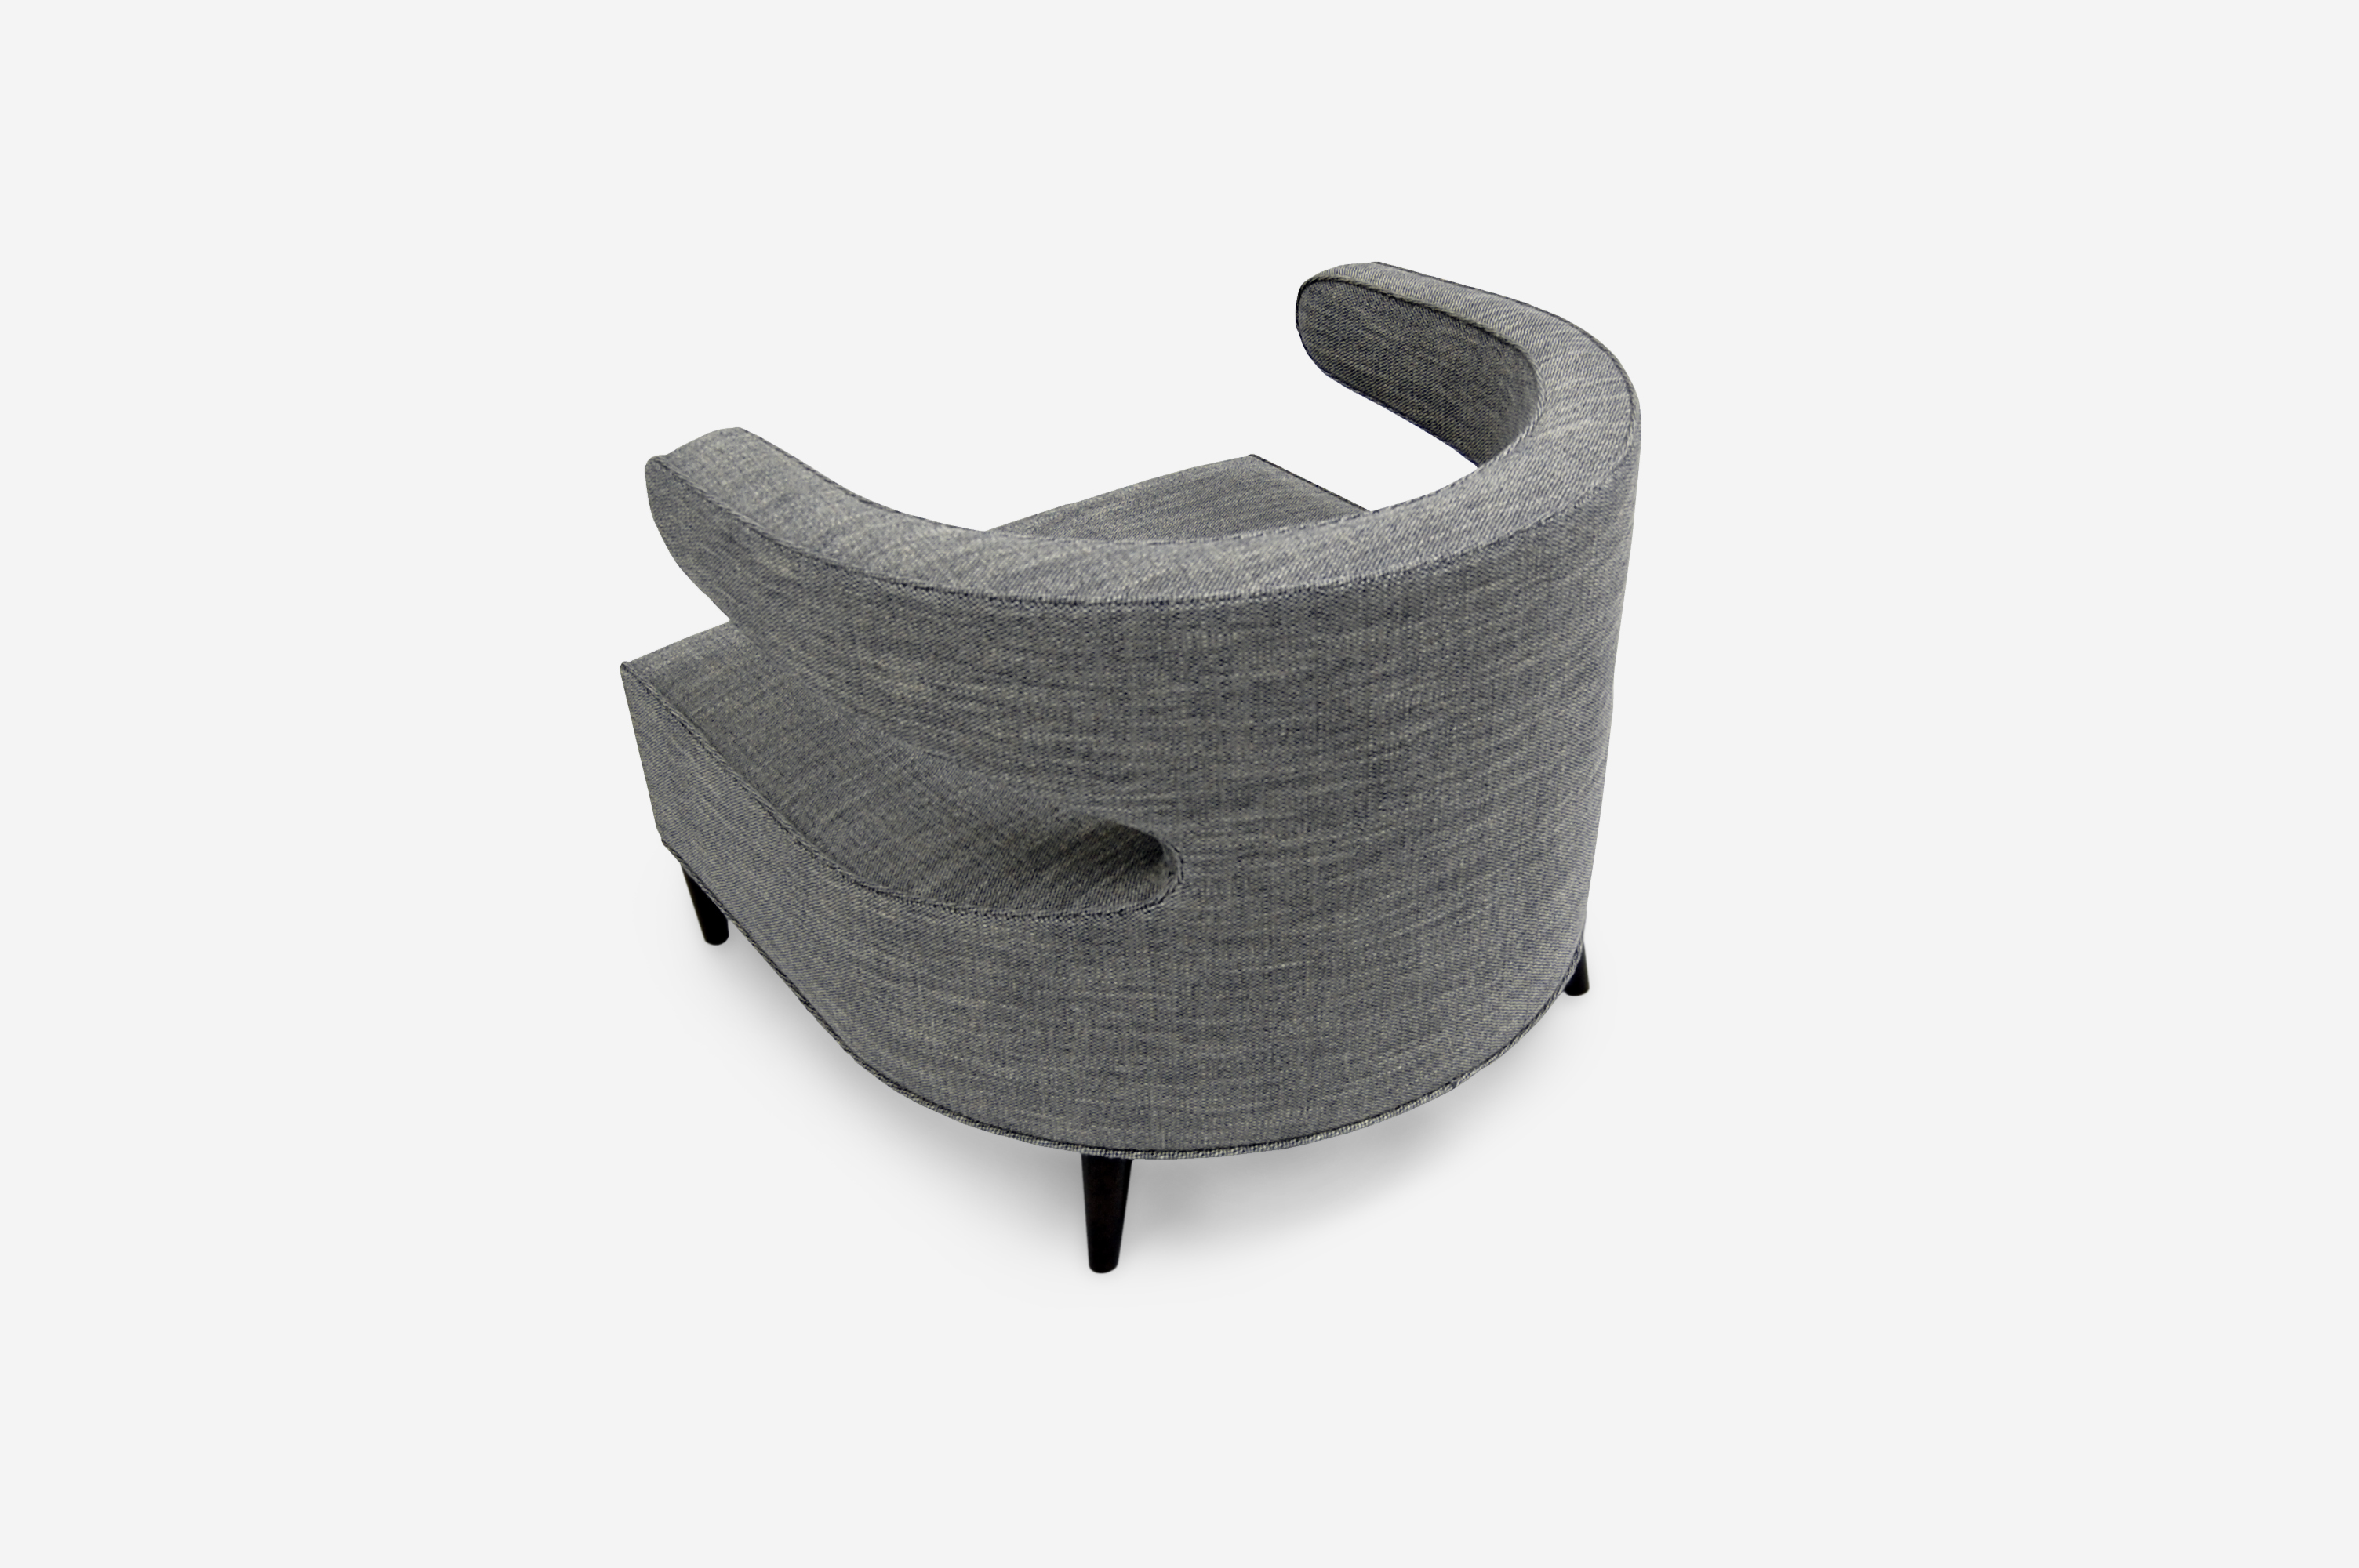 ROOM Curve Chair Grey Fabric Kiln-Dried Wood Frame, Ebony Maple Legs Made to Order Customizable ROOM Furniture